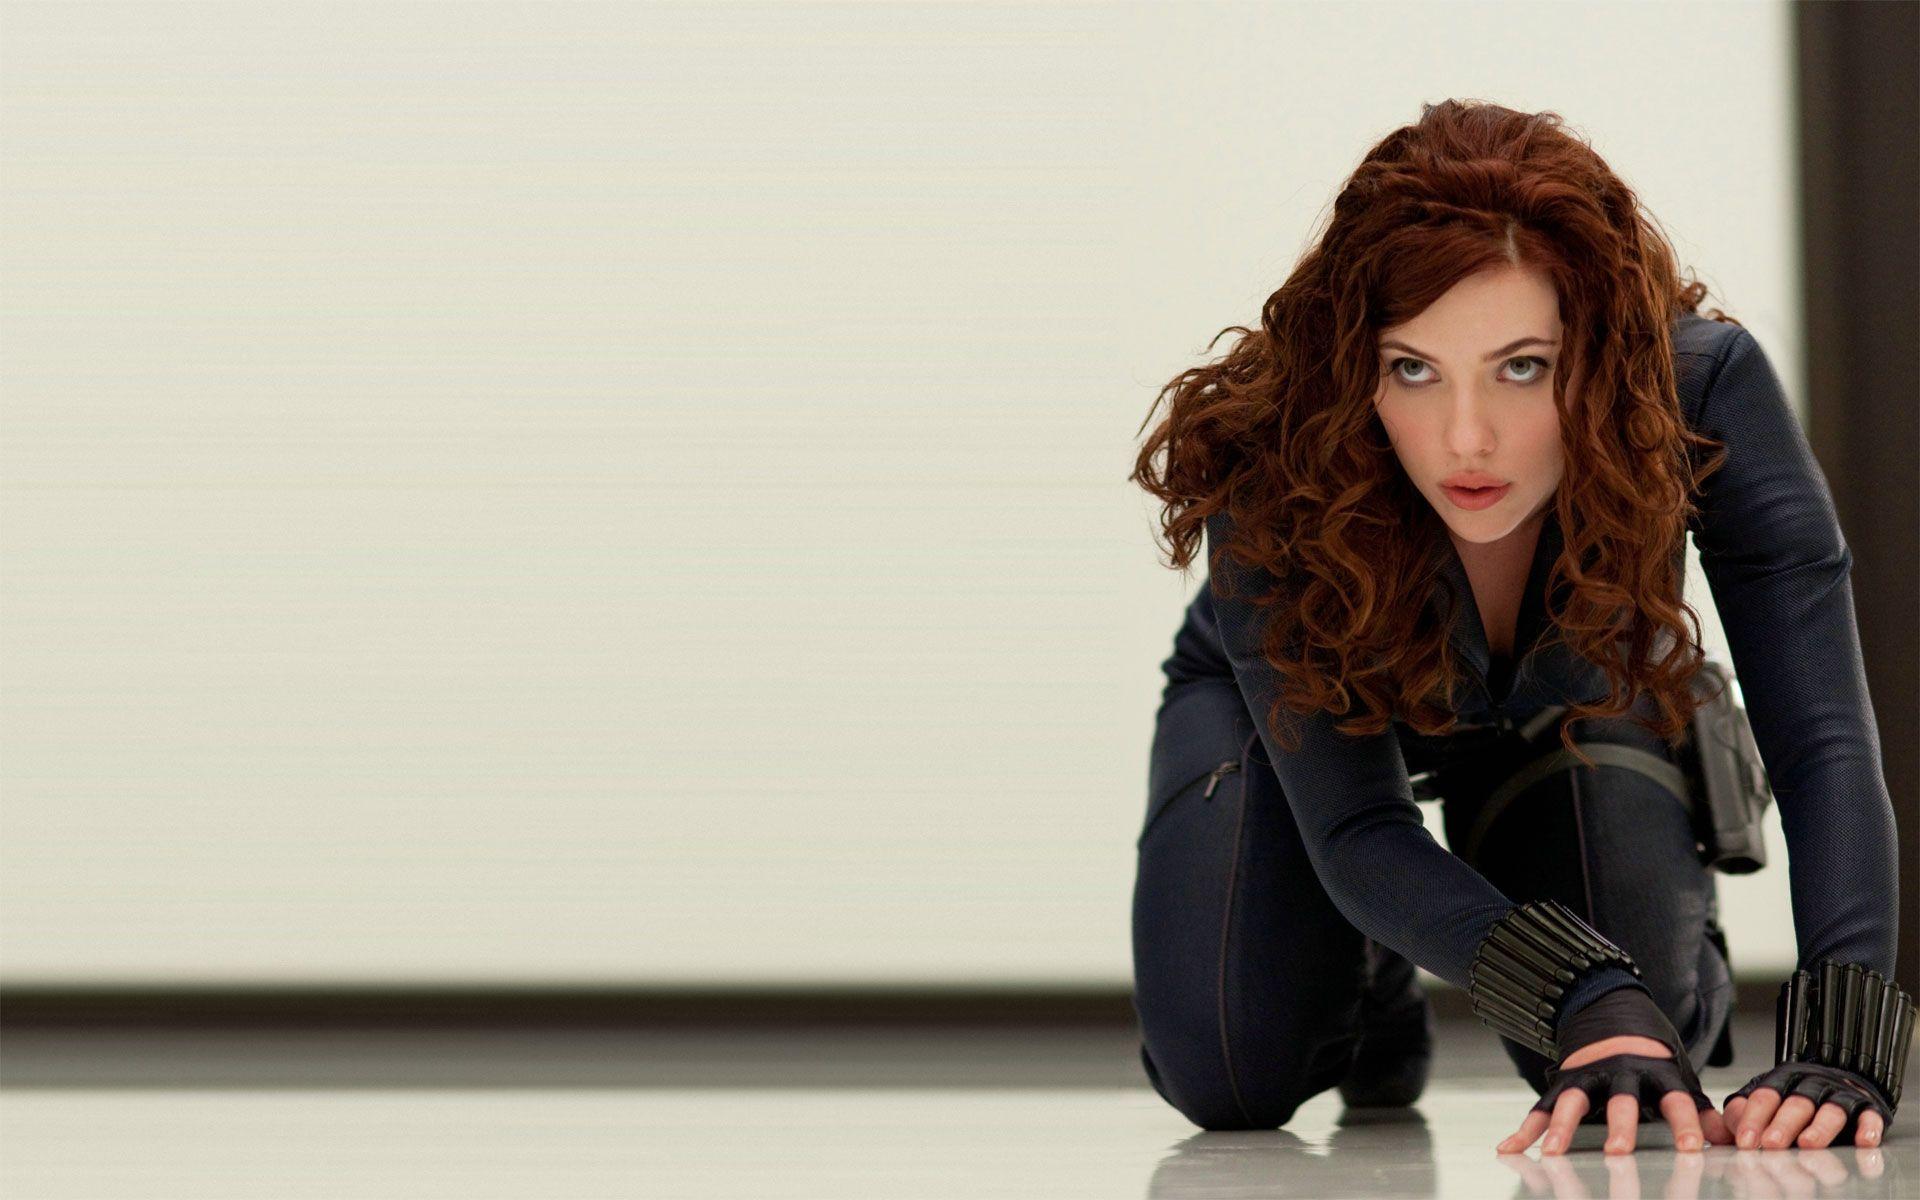 Awesome Black Widow Wallpaper & Picture Download HD Image